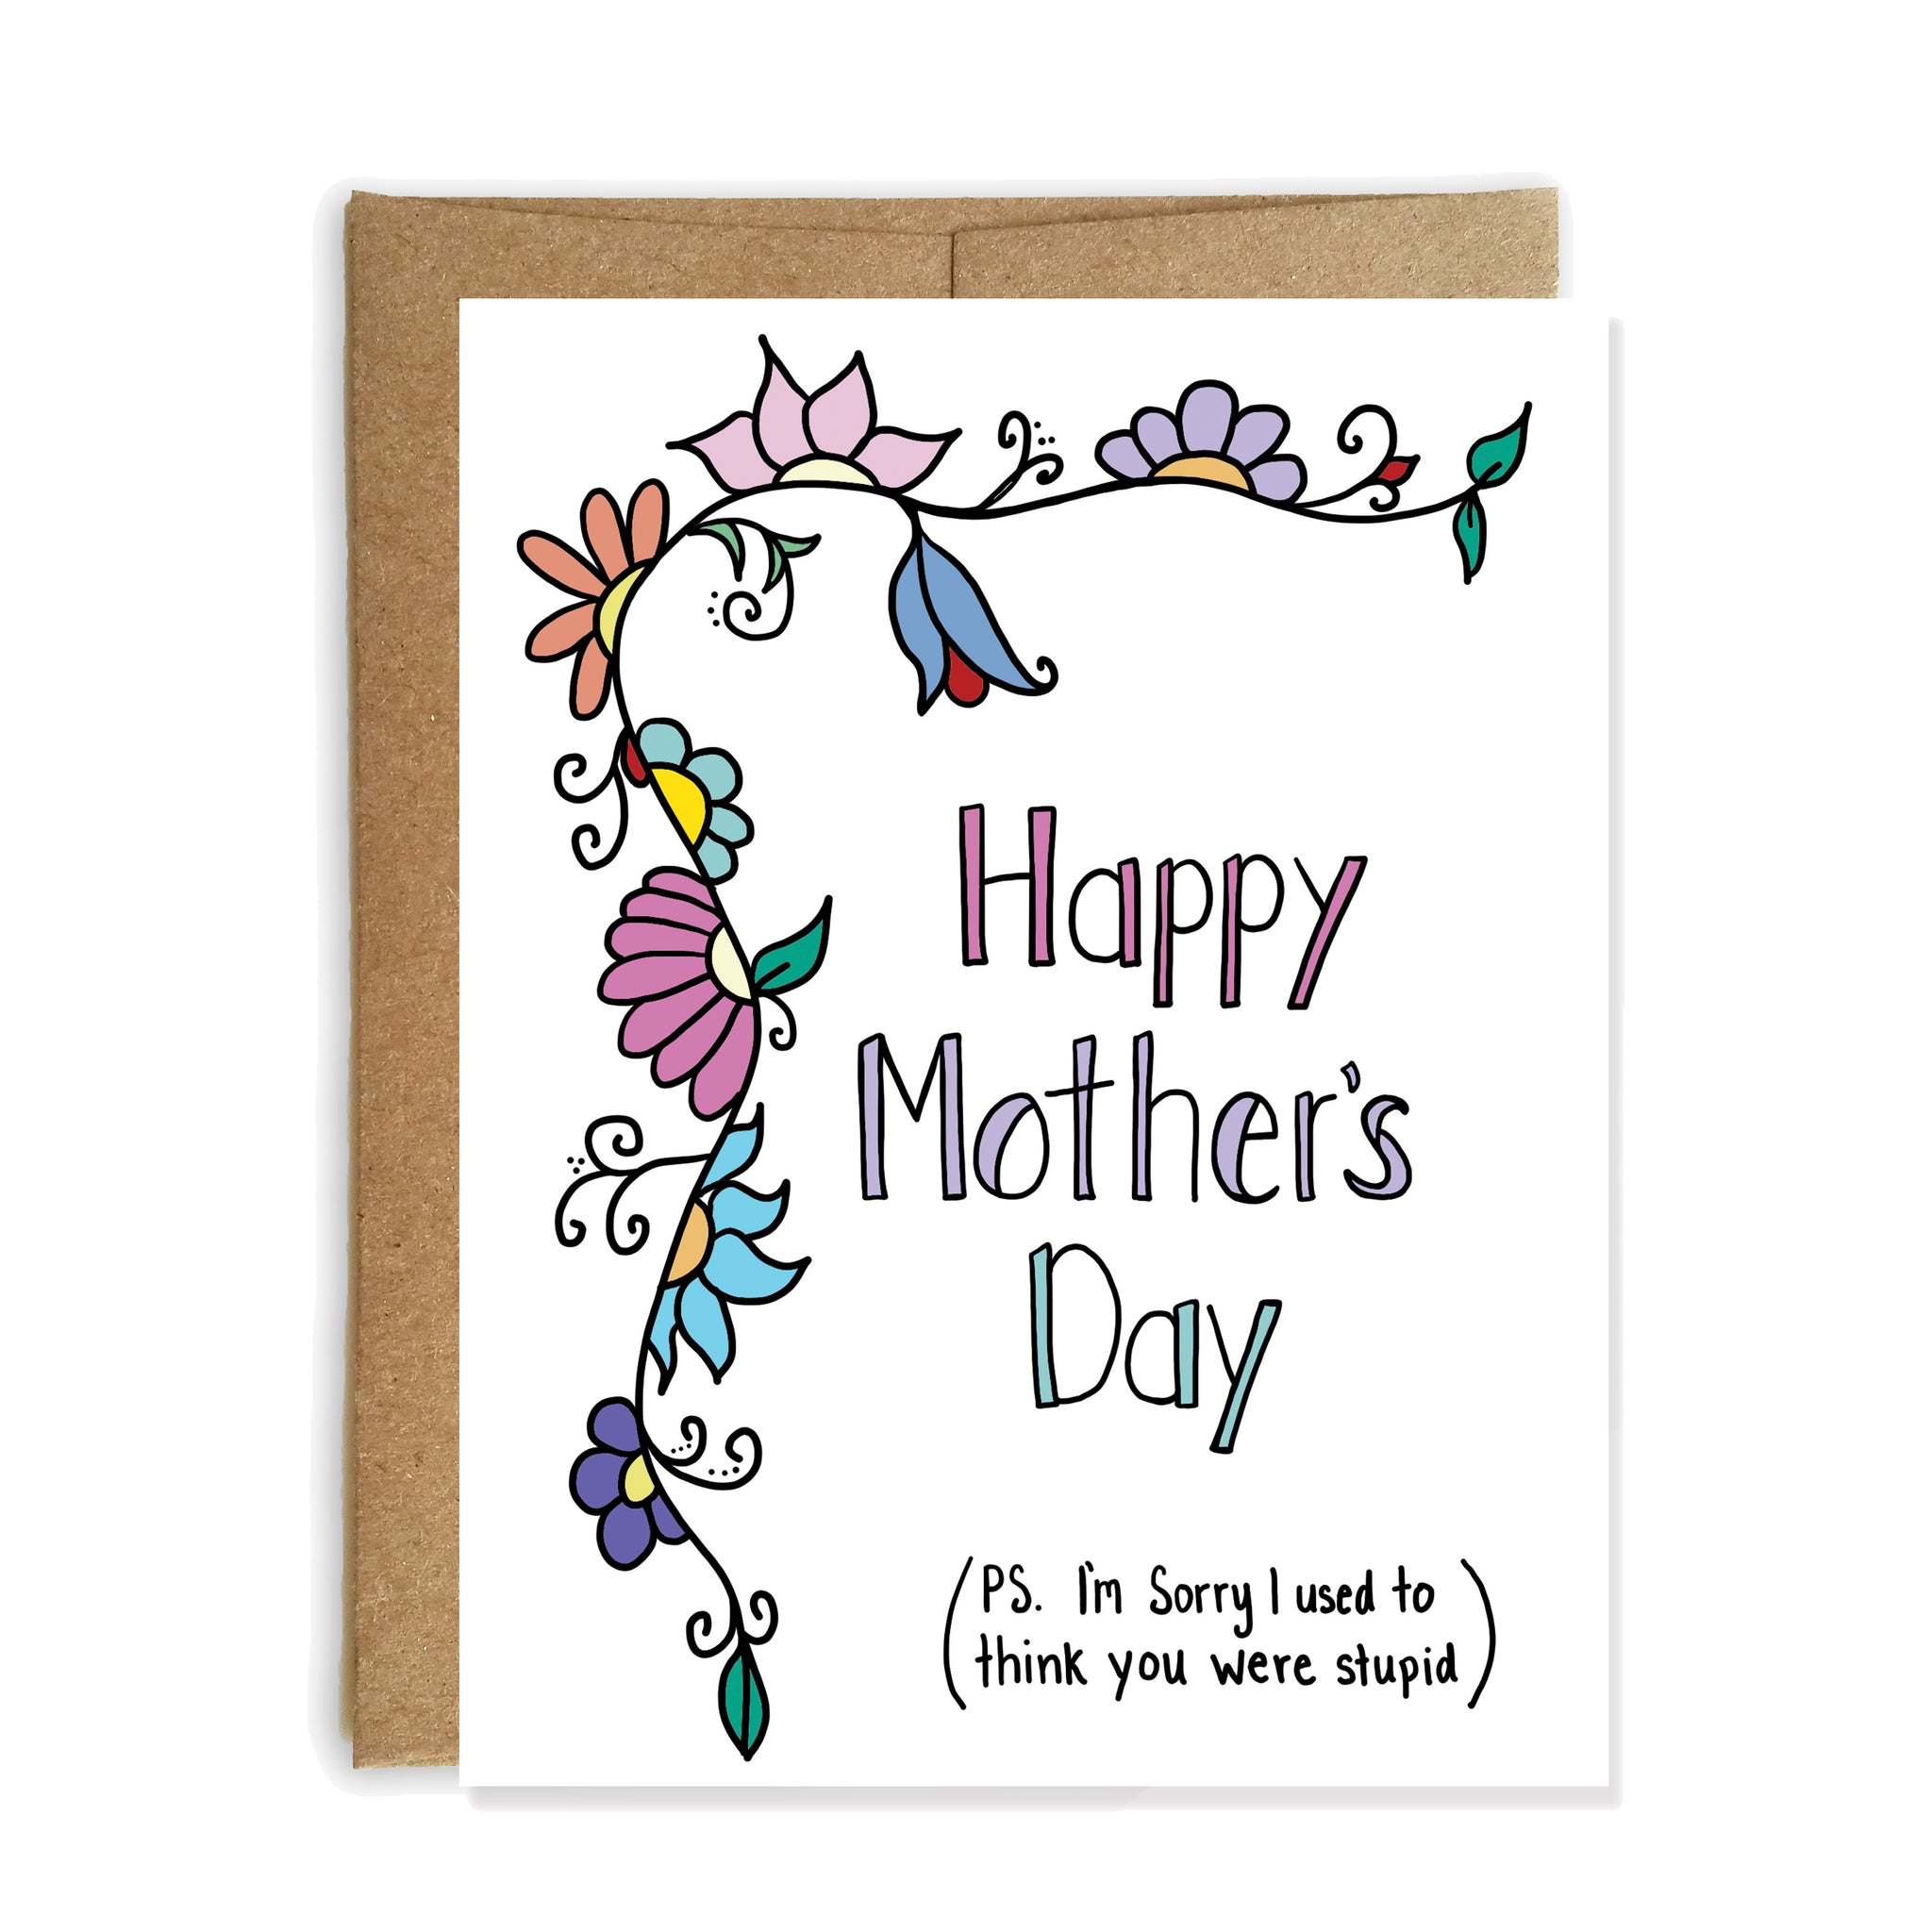 Sorry Mom, Funny Mother's Day Card